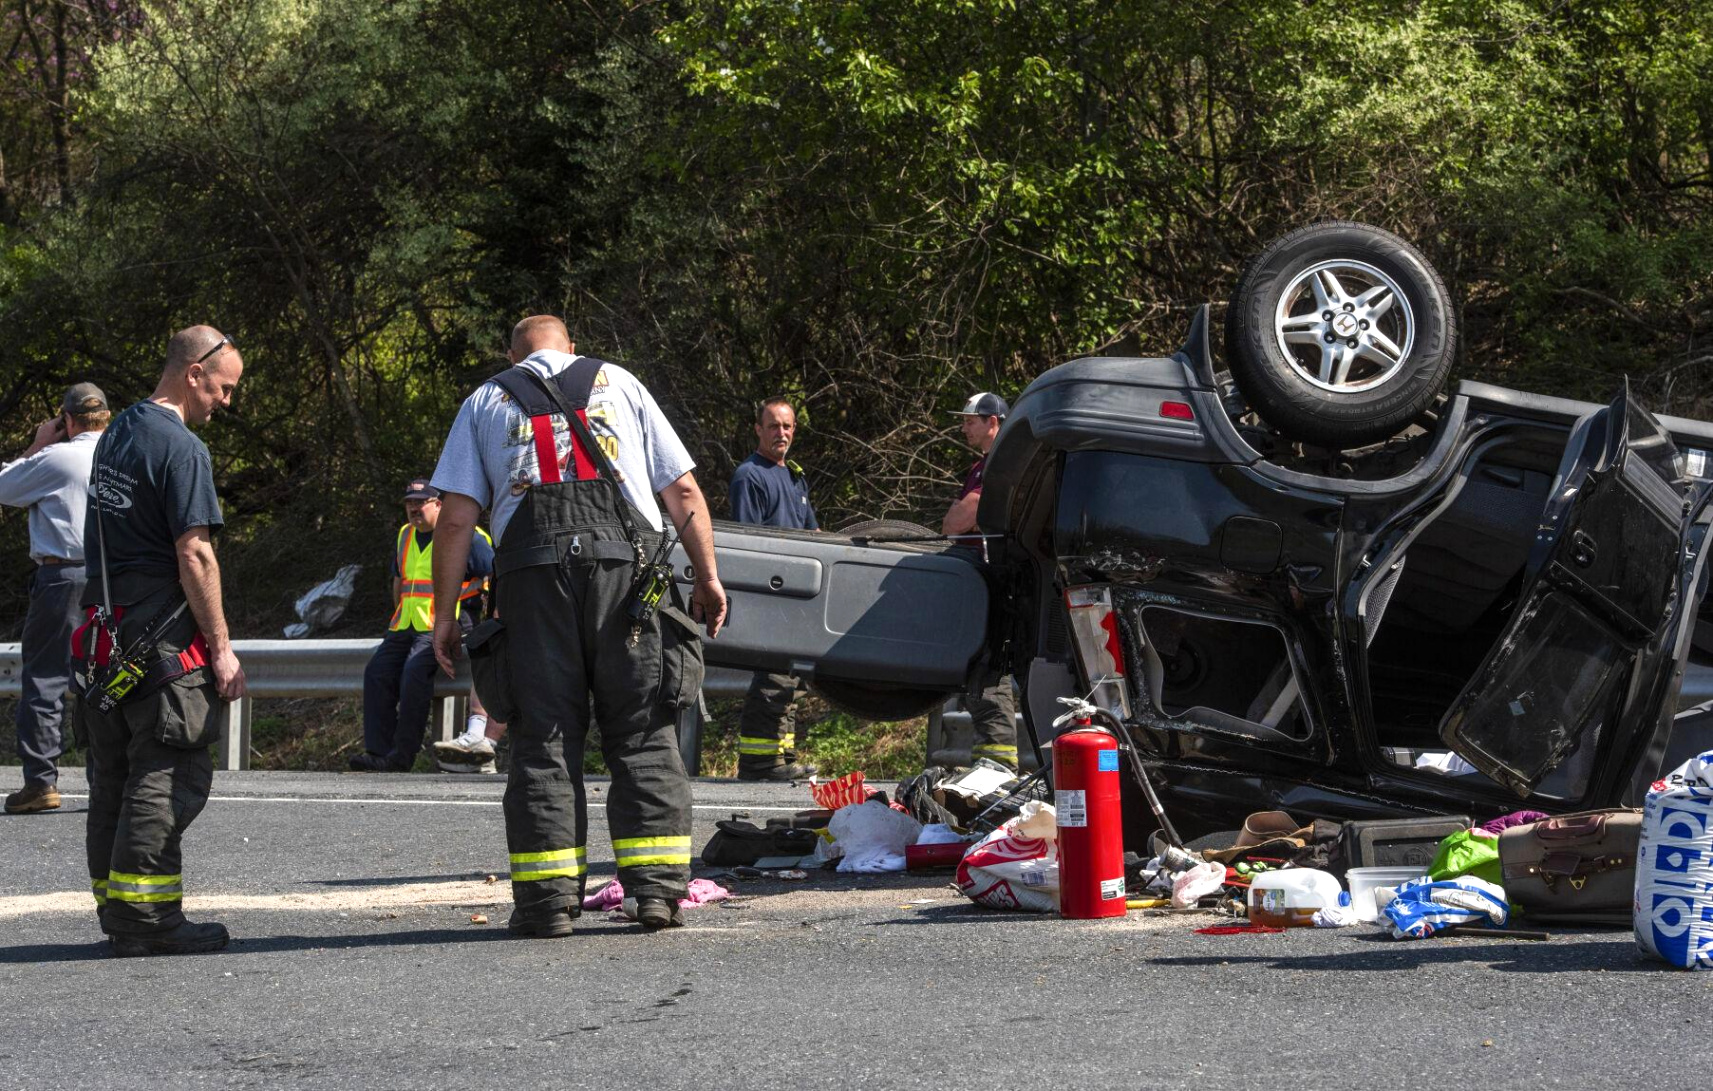 Car Accident Lawyer In somerset Md Dans Driver In Fatal U.s. 340 Crash Found, but Not Charged so Far ...